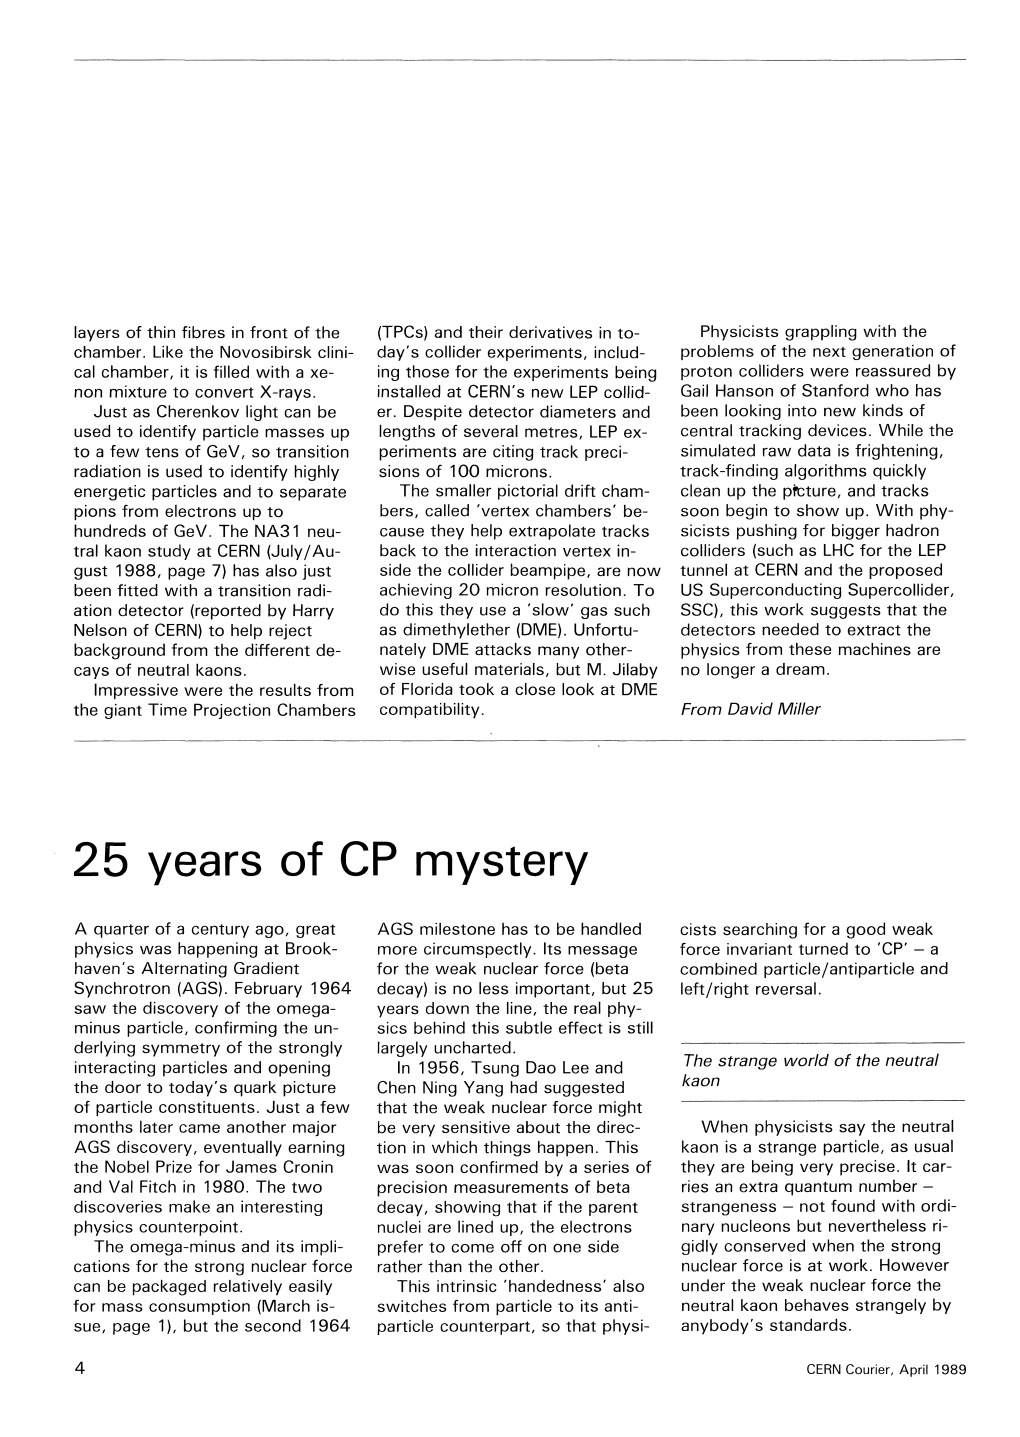 25 Years of CP Mystery